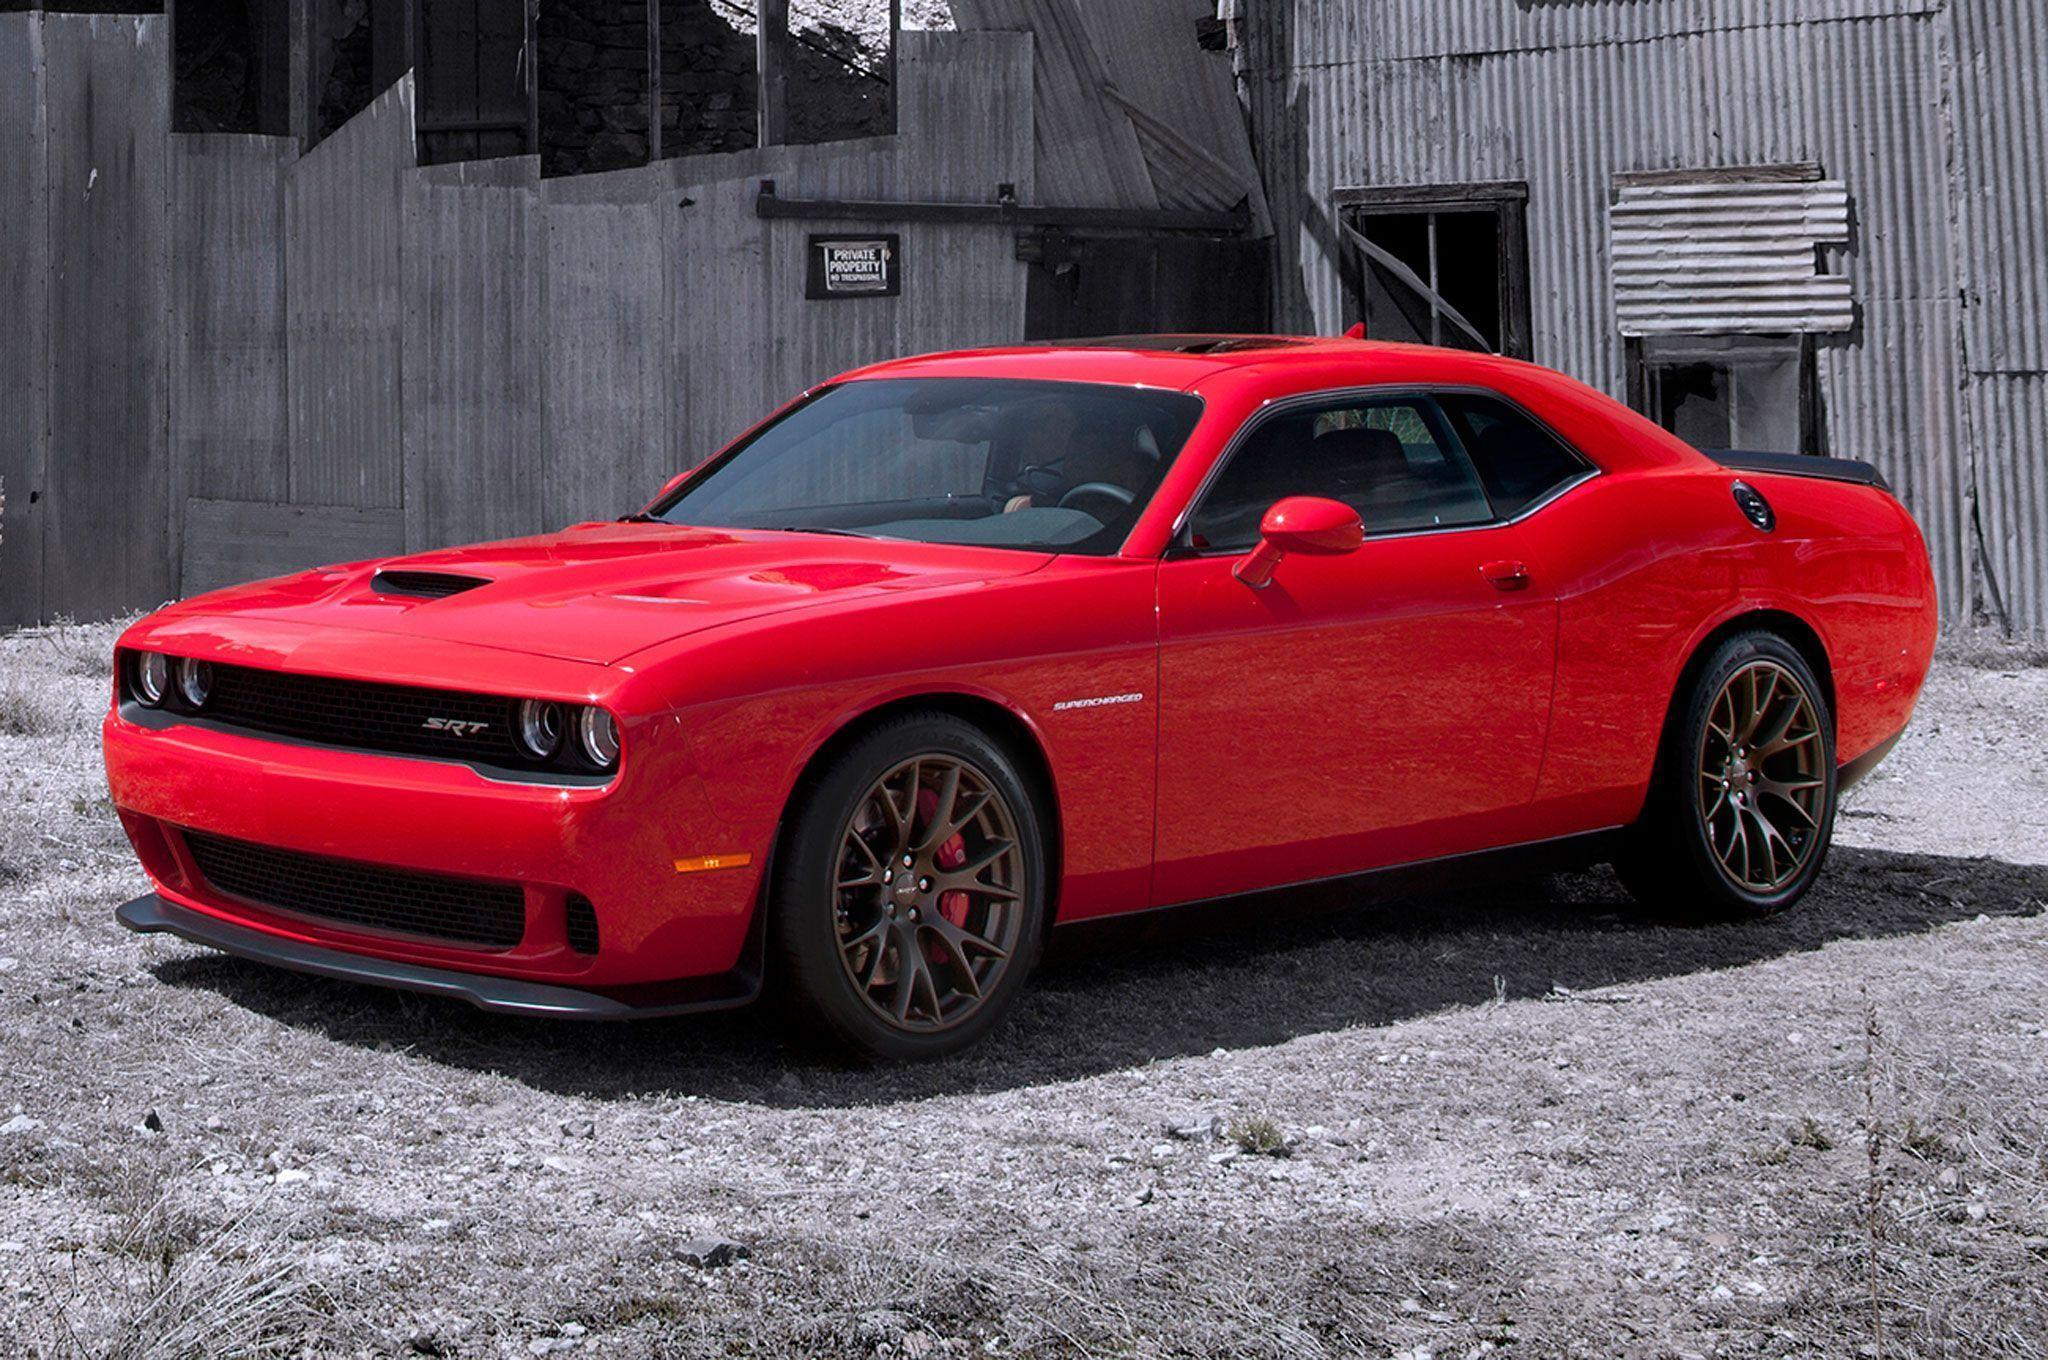 Dodge Charger Hellcat SRT 2015 HD Picture Wallpaper Download